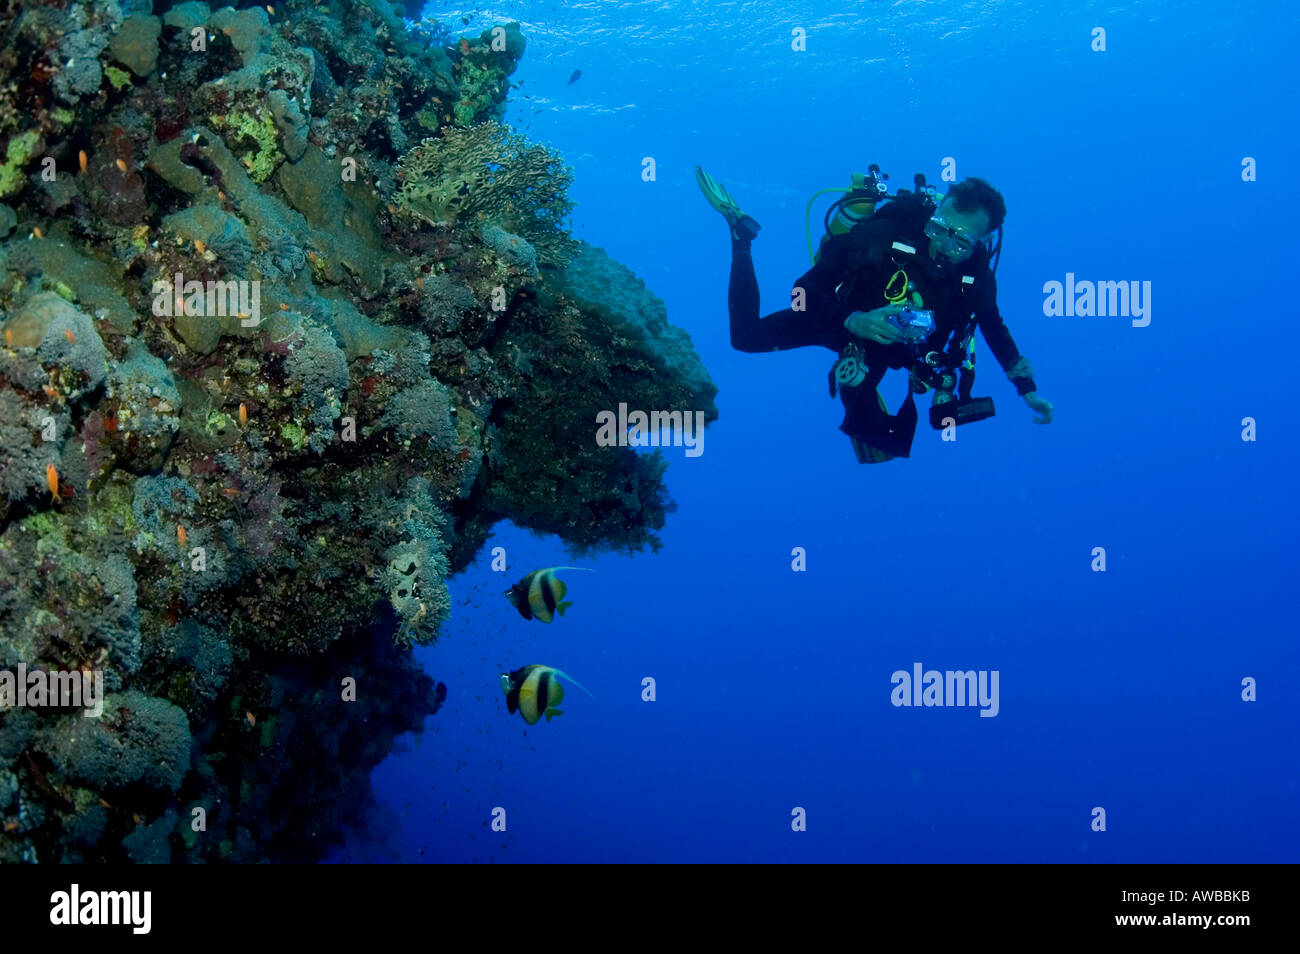 Pete Ball. Diver with camera looking at Red Sea reef with fish. Stock Photo